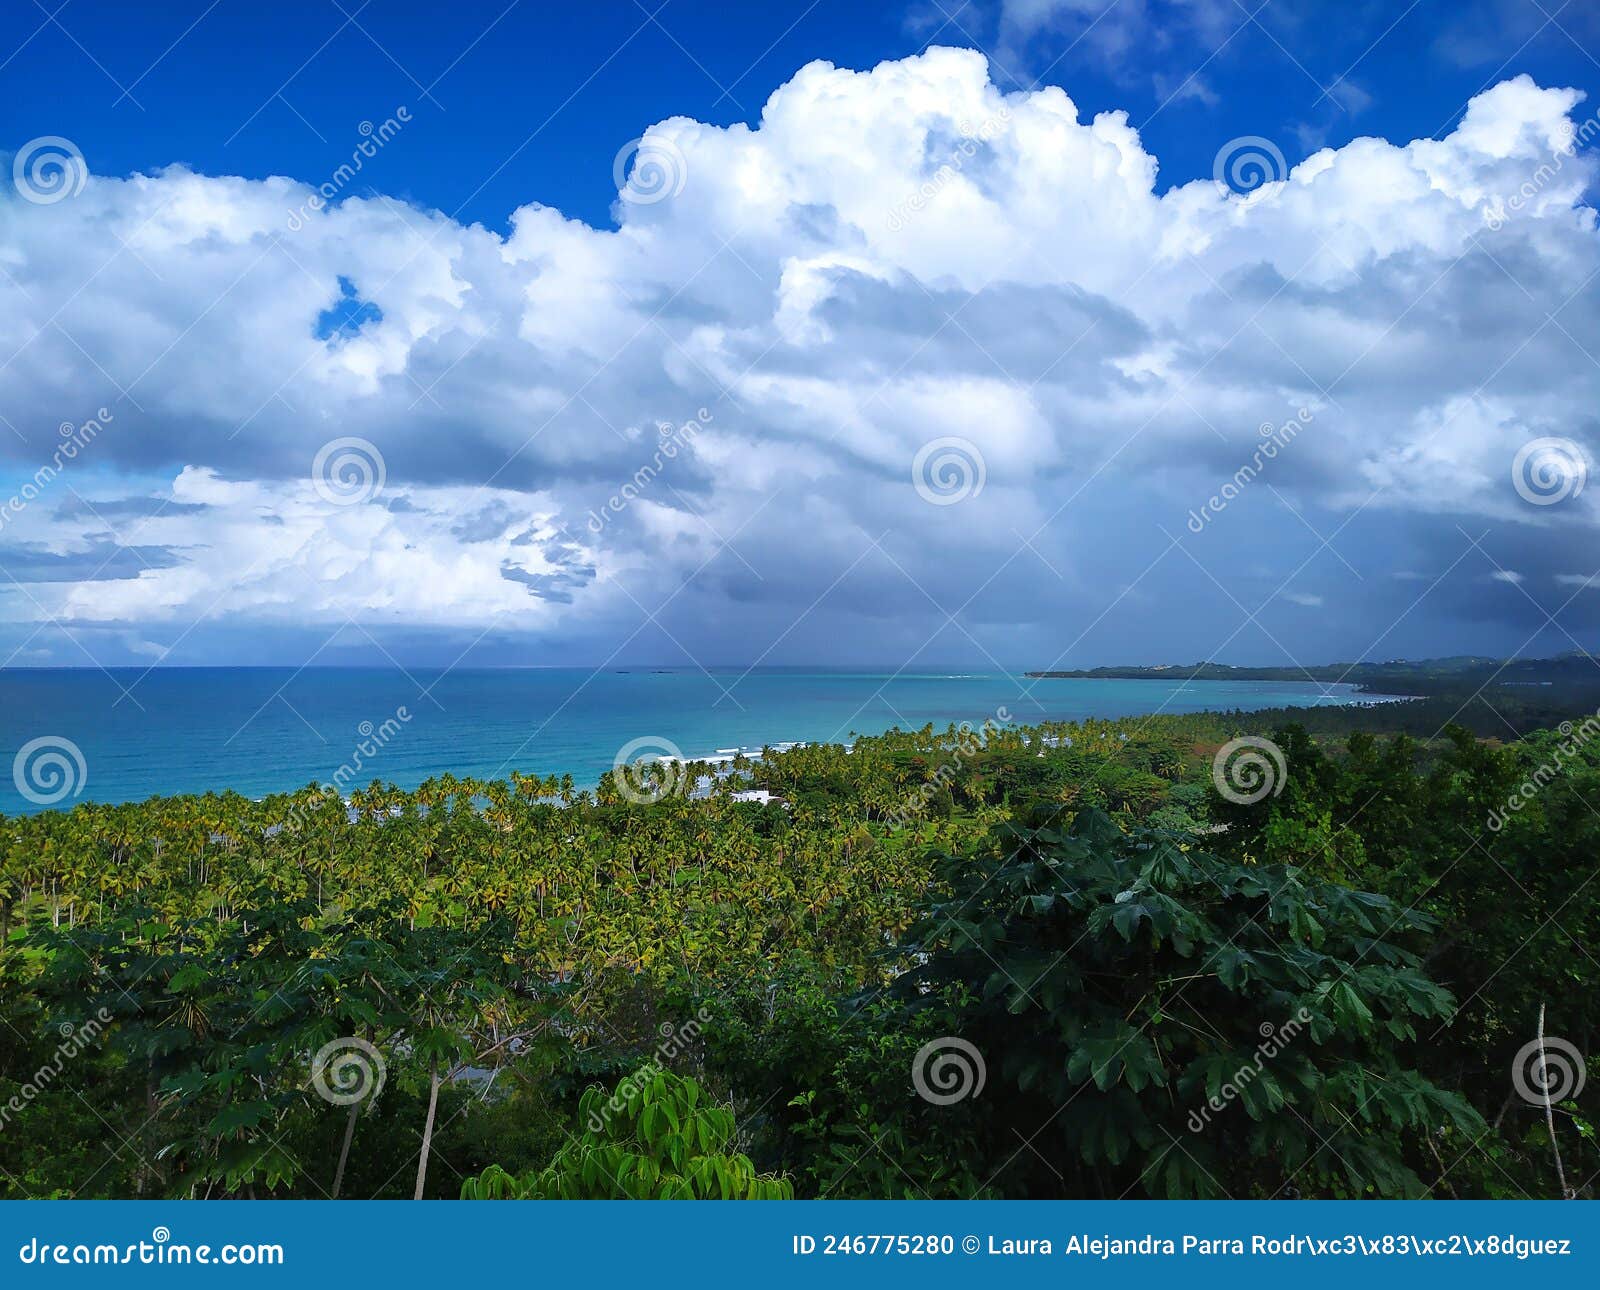 a natural and tropical landscape with beach and clouds. paisaje natural tropical con playa y nubes